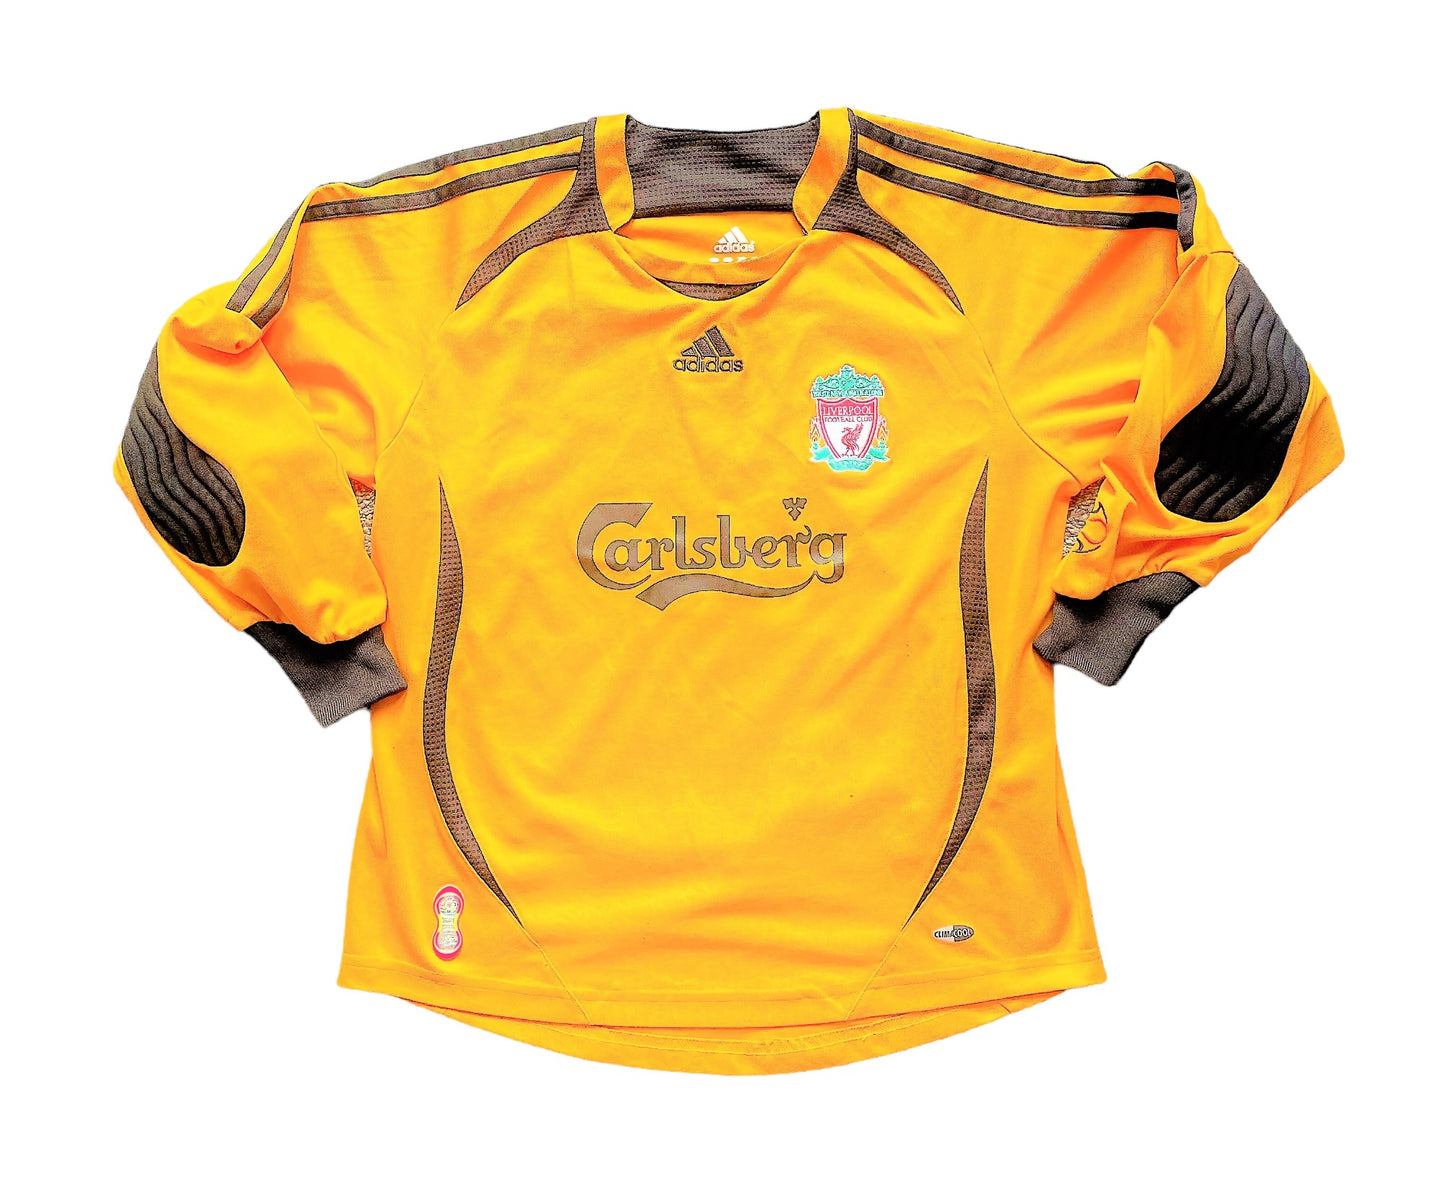 Liverpool Goalkeeper Shirt 2006/07 (very good) Youths 28-30 so 10/12 years